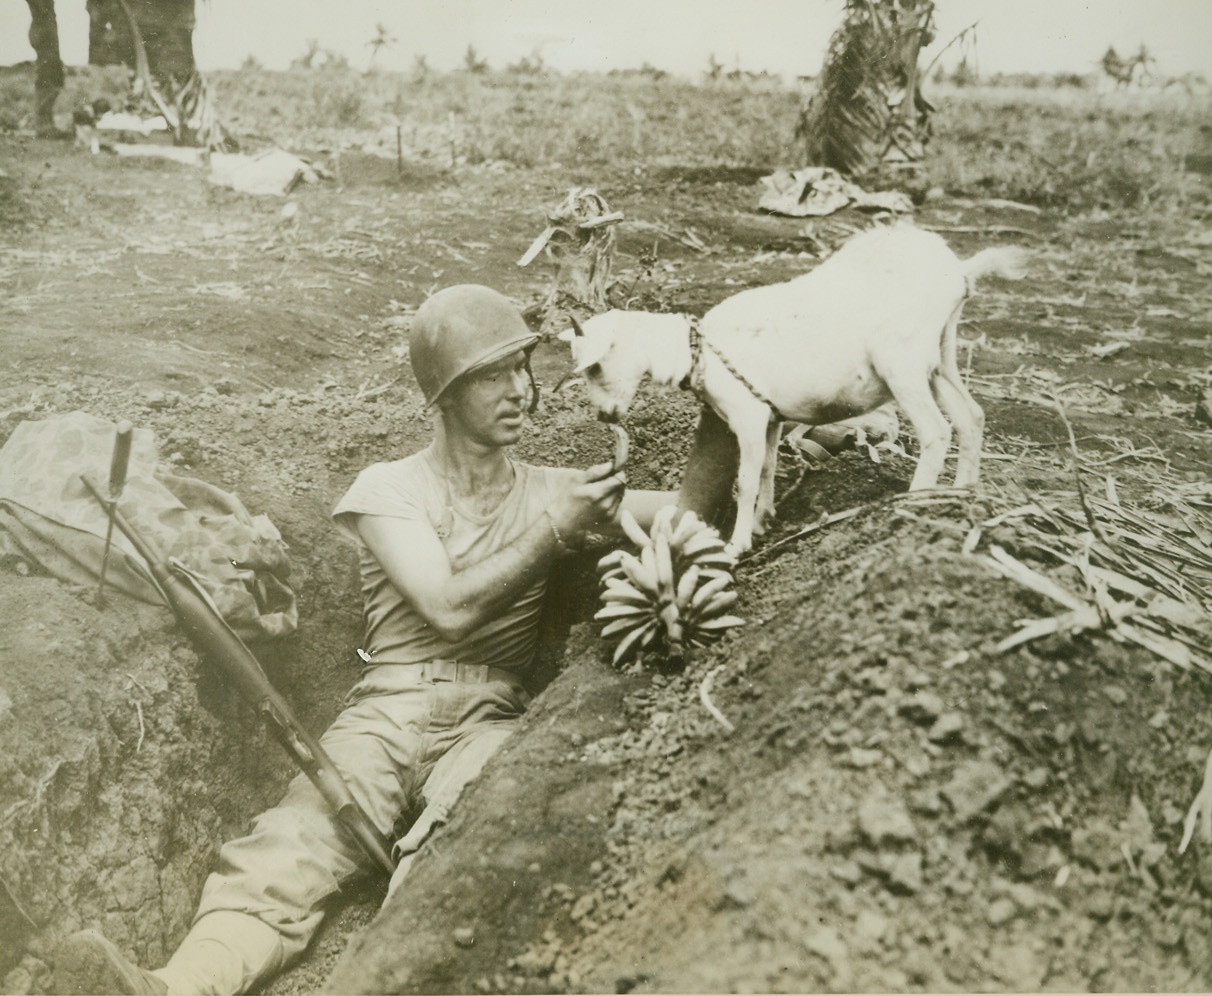 Gee Whiz! Bananas!, 7/3/1944. Saipan, Mariana Is. - - The way this goat is nibbling indifferently at the bananas being fed him by Marine 1st/Sgt. Neil I. Shober, Ft. Wayne, Ind., just goes to show that the animal doesn’t appreciate the finer things in life.  Sgt. Shober, a veteran of Guadalcanal and Tabawa, participated in the Marine invasion of Jap-held Saipan.Credit Line (Official Marine Corps photo from ACME);